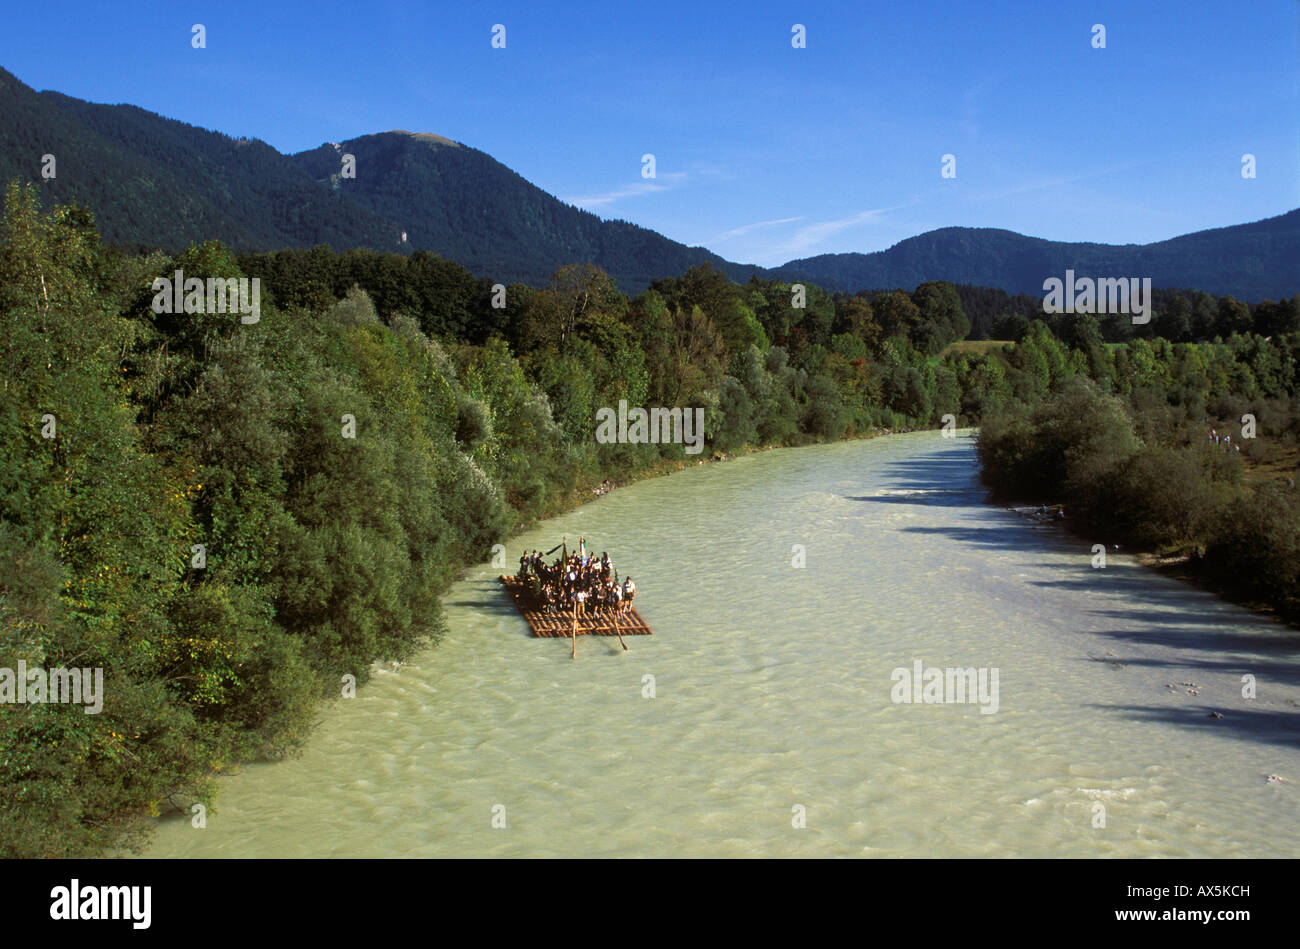 Raft travelling down the Isar River near Lenggries, Upper Bavaria, Bavaria, Germany, Europe Stock Photo